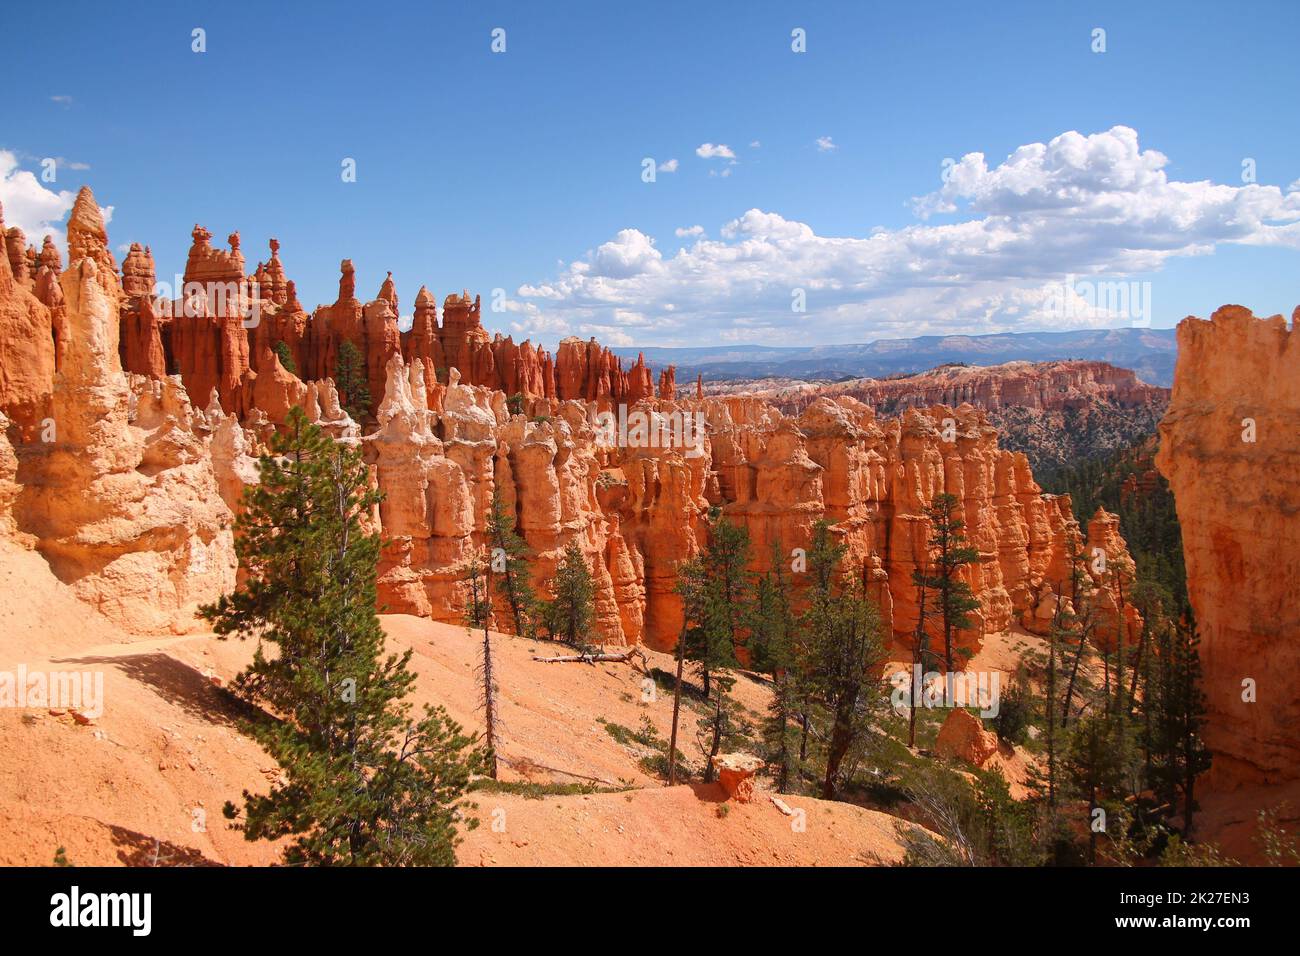 The descending gravel trail among the orange rock hoodoos of the Bryce Canyon National Park Stock Photo